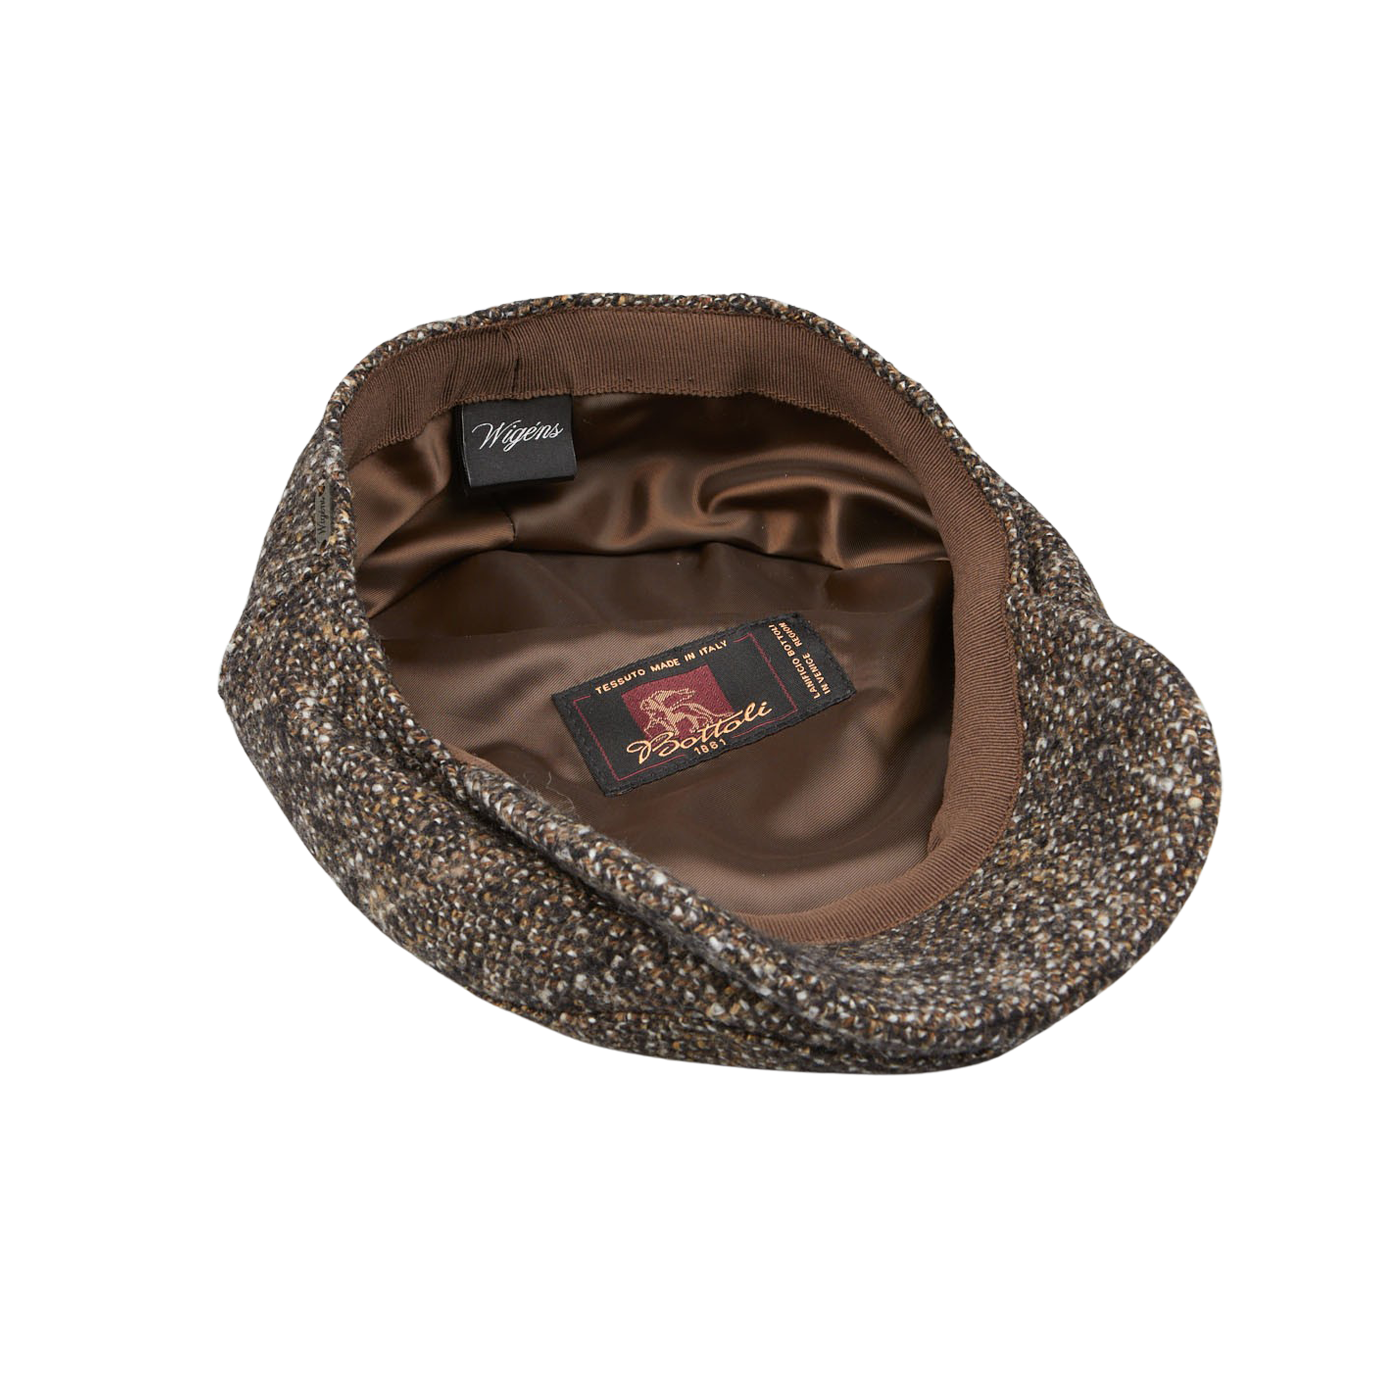 A Wigéns Brown Melange Wool Ivy Contemporary Cap with a label on it made of wool blend fabric.